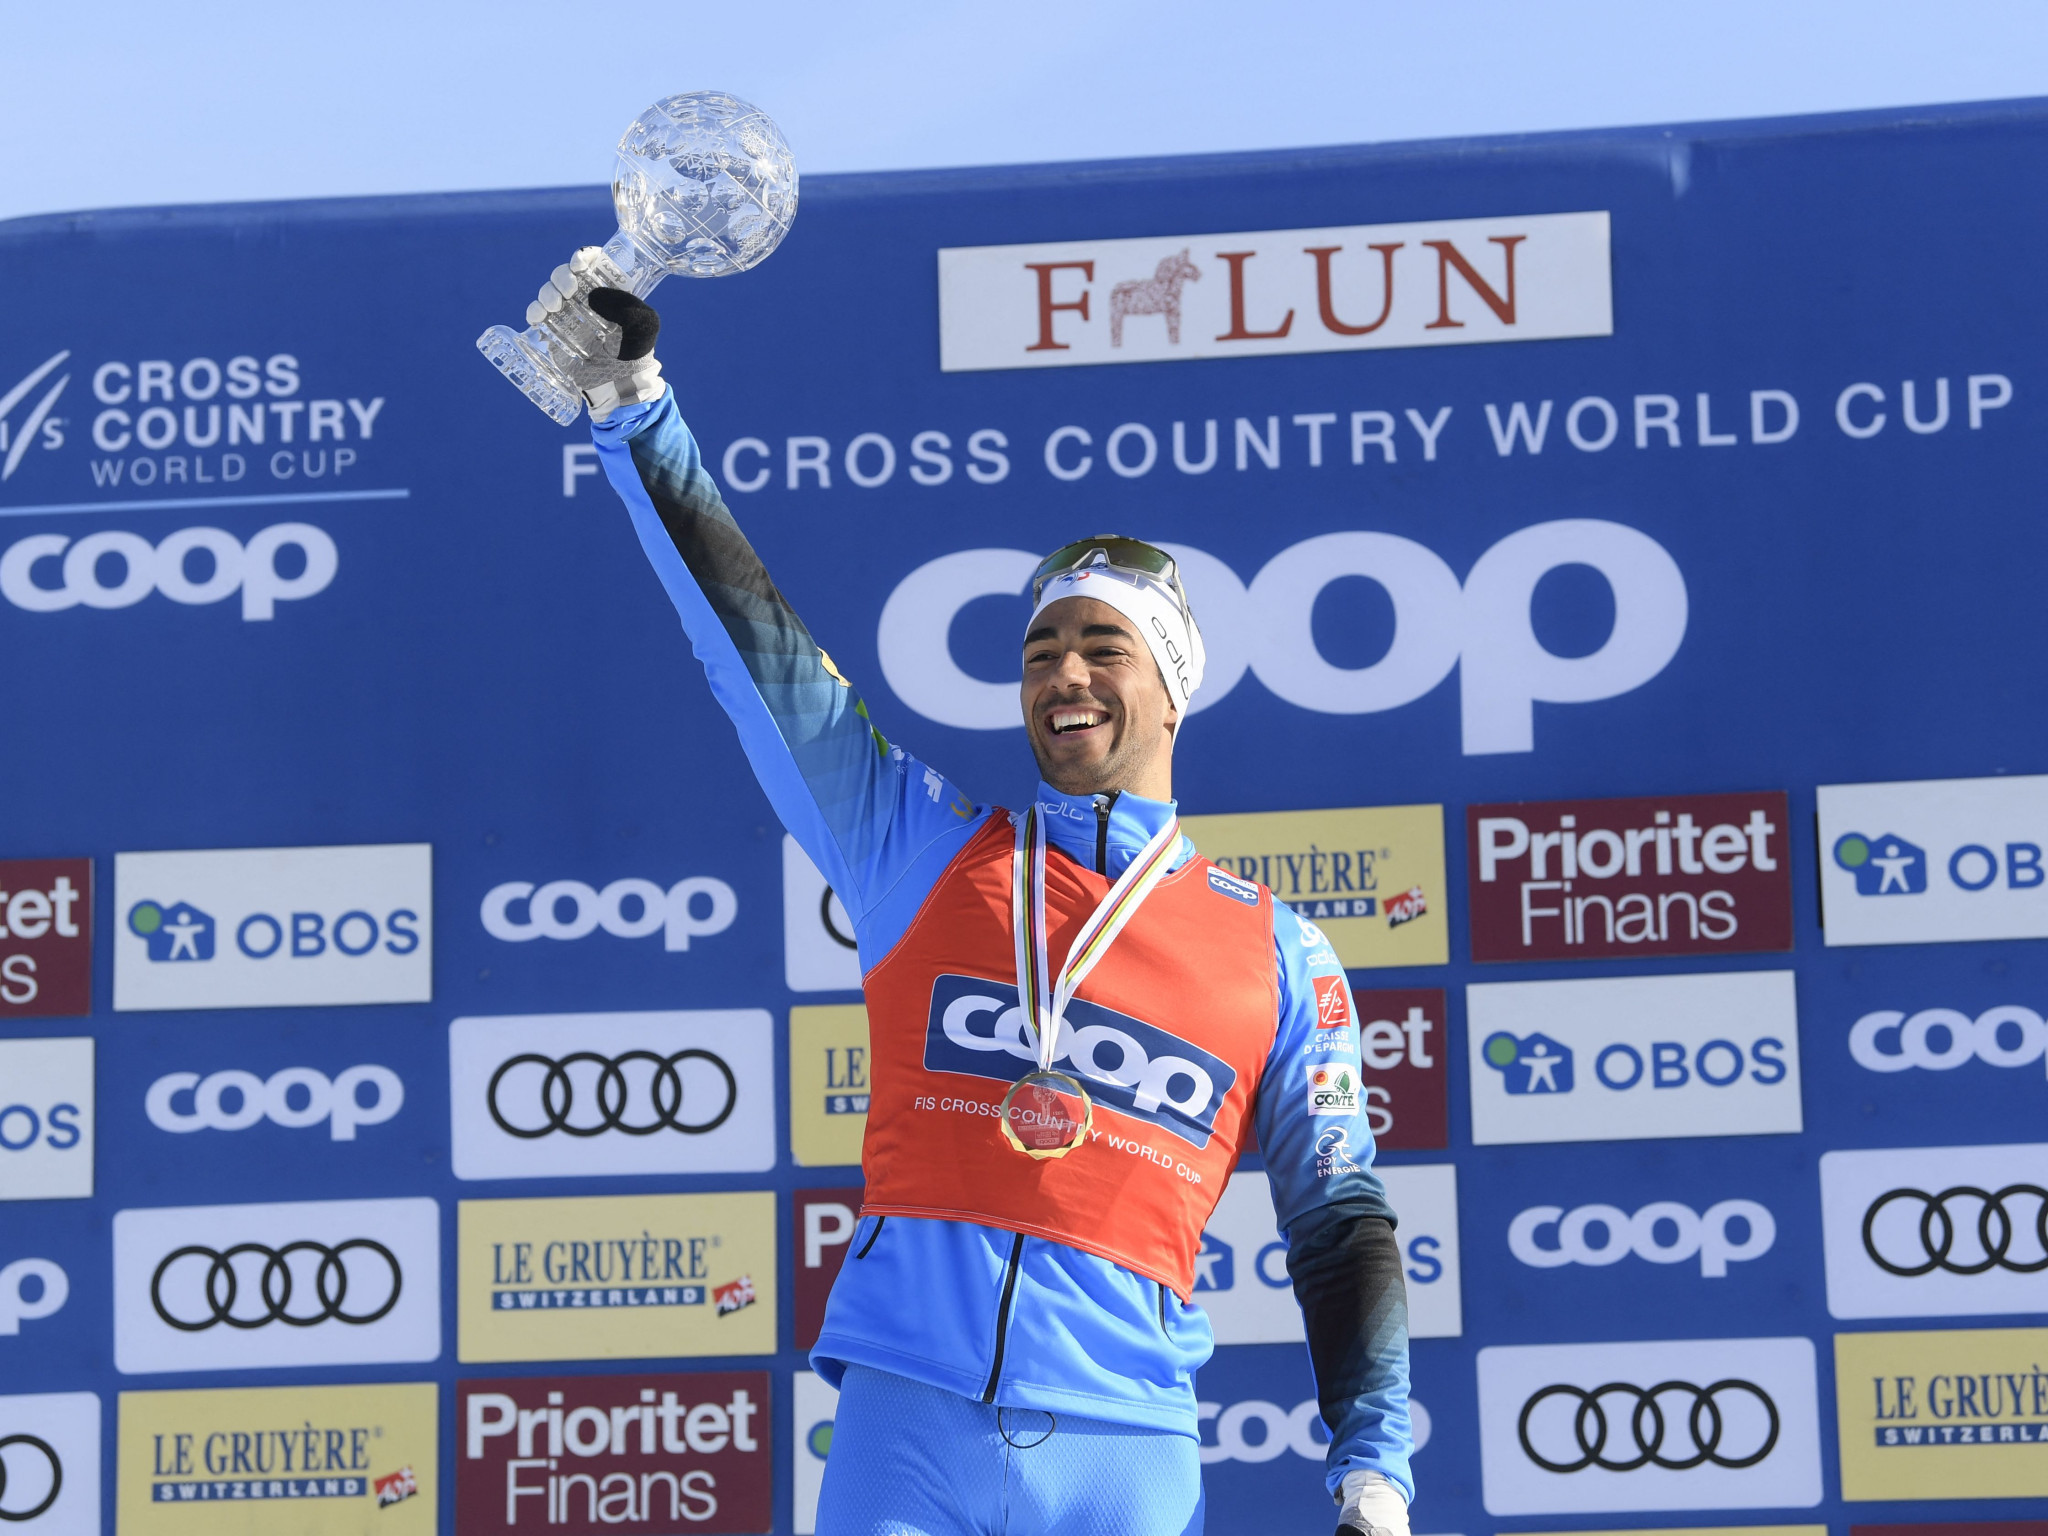 Jouve triumphs in Cross-Country World Cup at Falun to become first French winner of sprint crystal globe